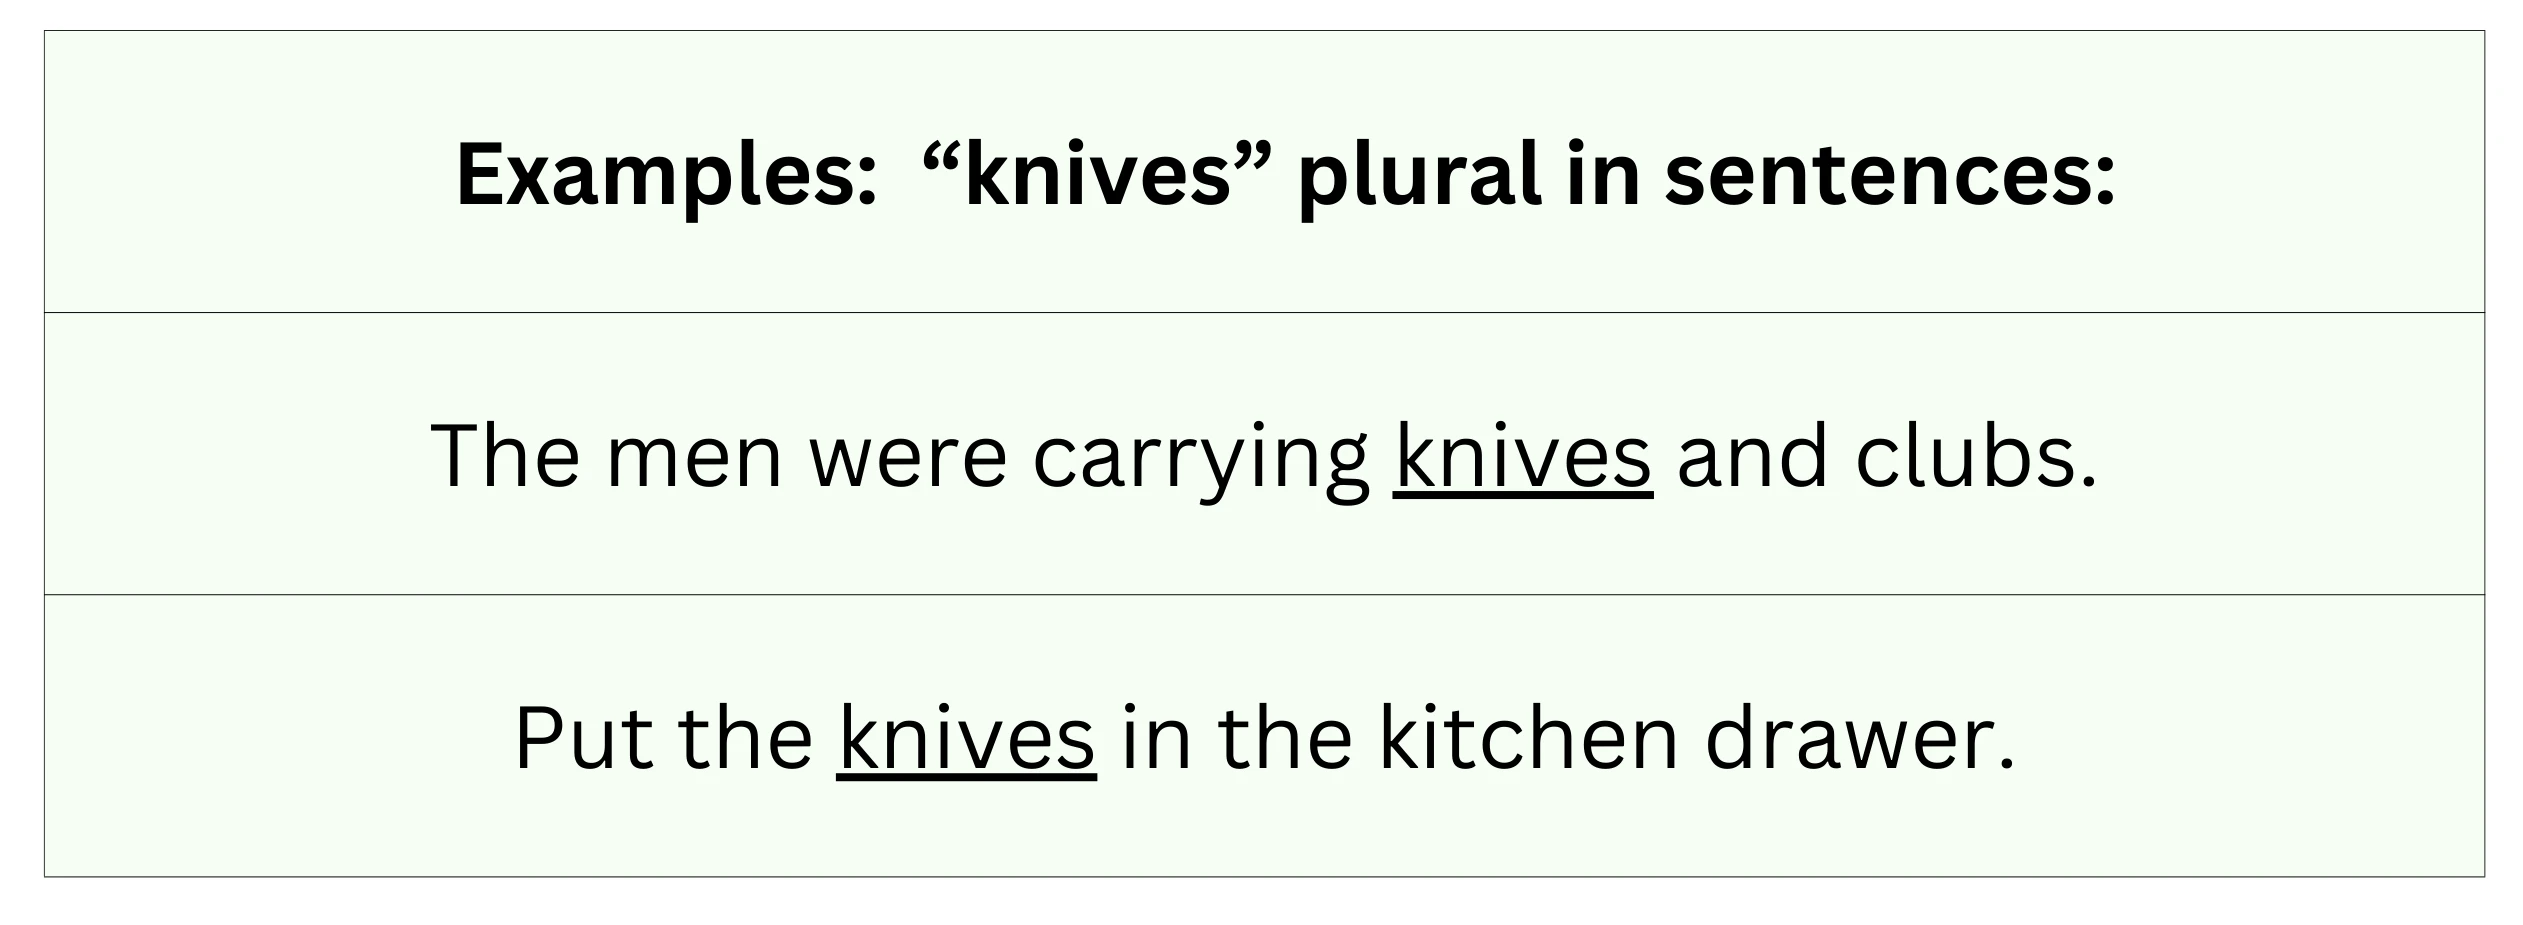 "Knives" plural in sentence examples.